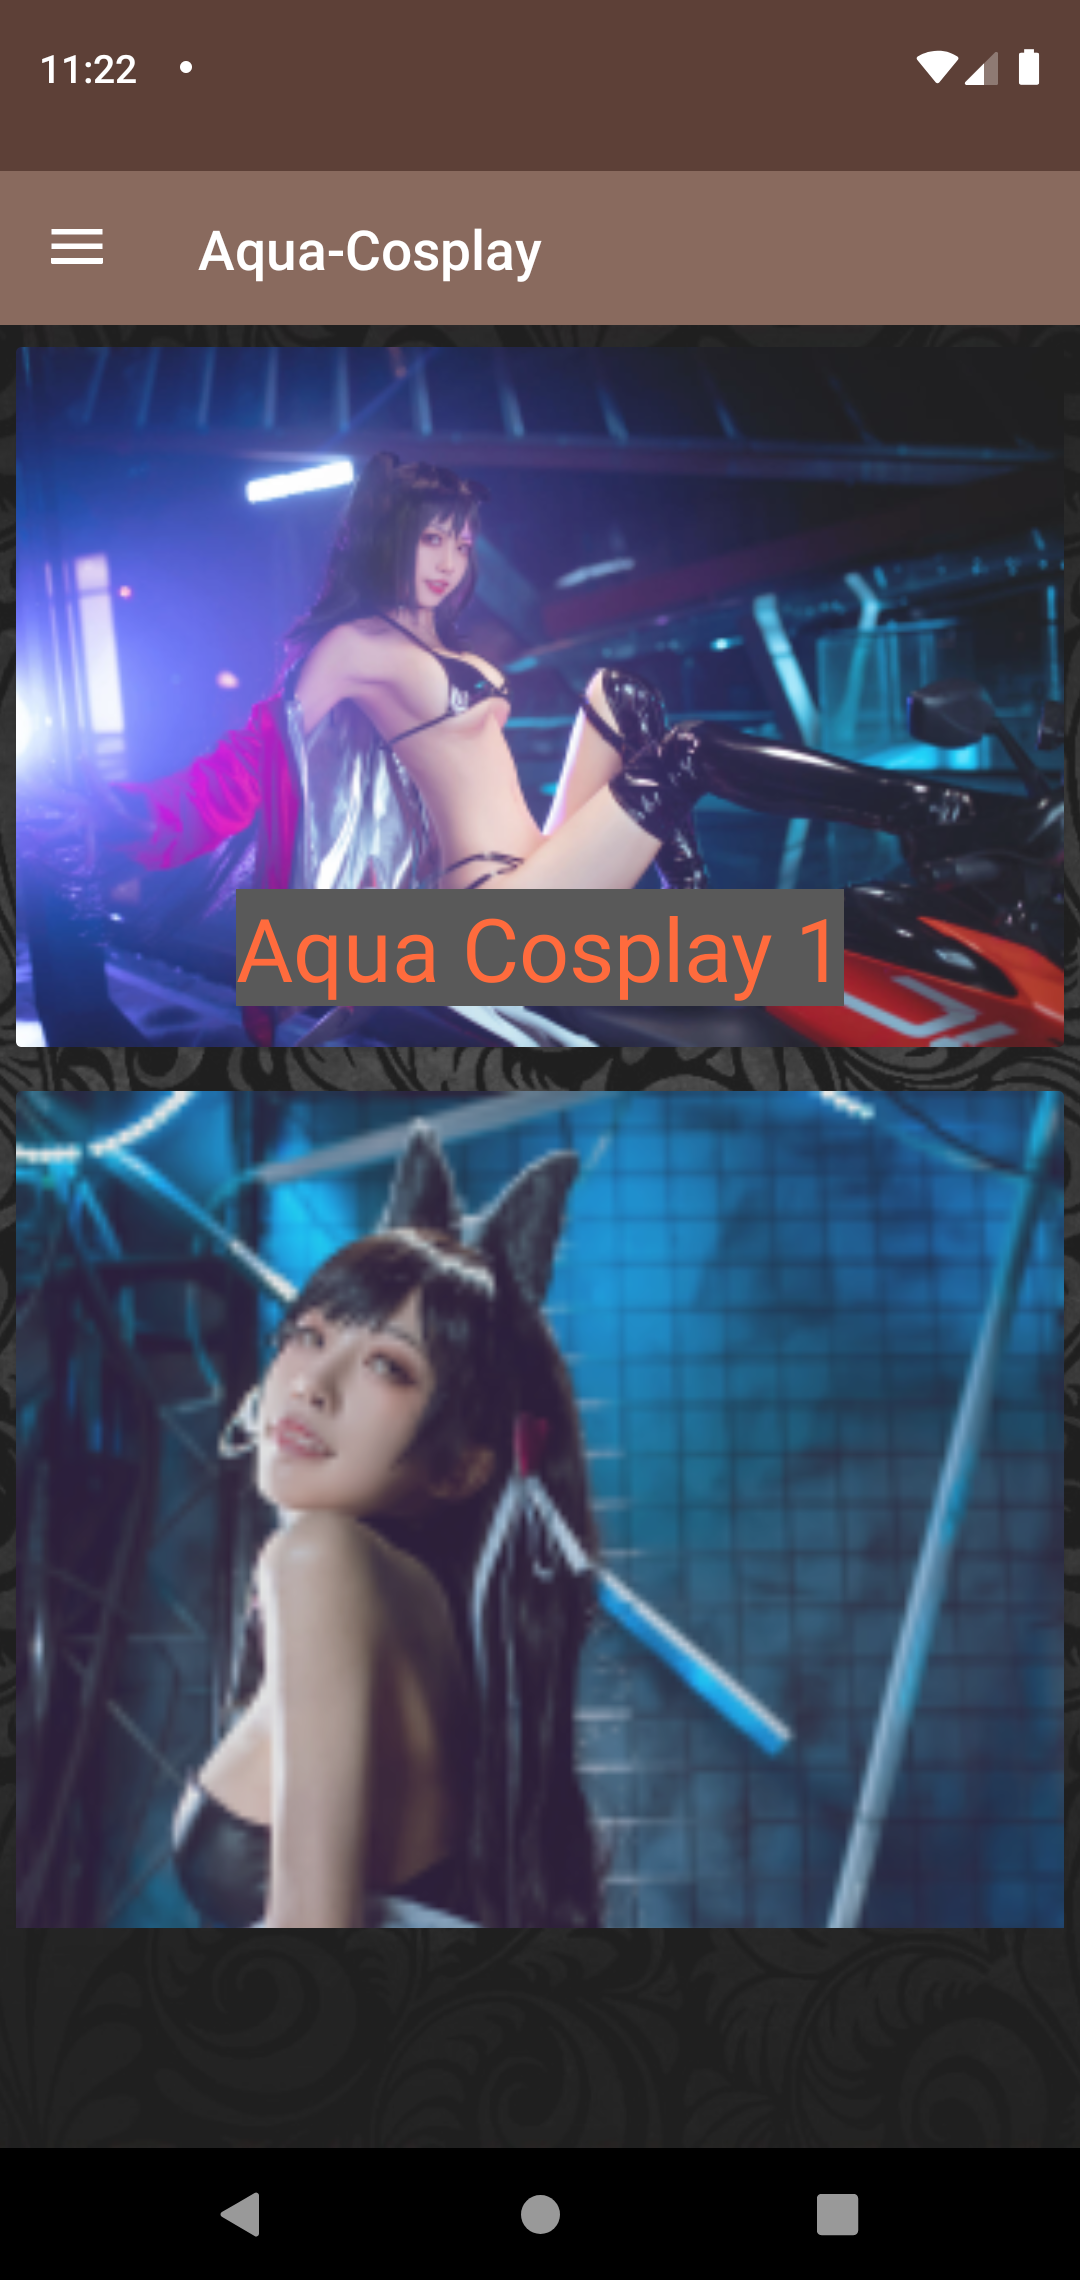 Aqua Cosplay hetai,sexyteengalleries,image,apps,gallery,photos,apk,cosplay,picture,photo,pics,collection,pic,pictures,hentai,android,hentia,download,downloads,porn,editor